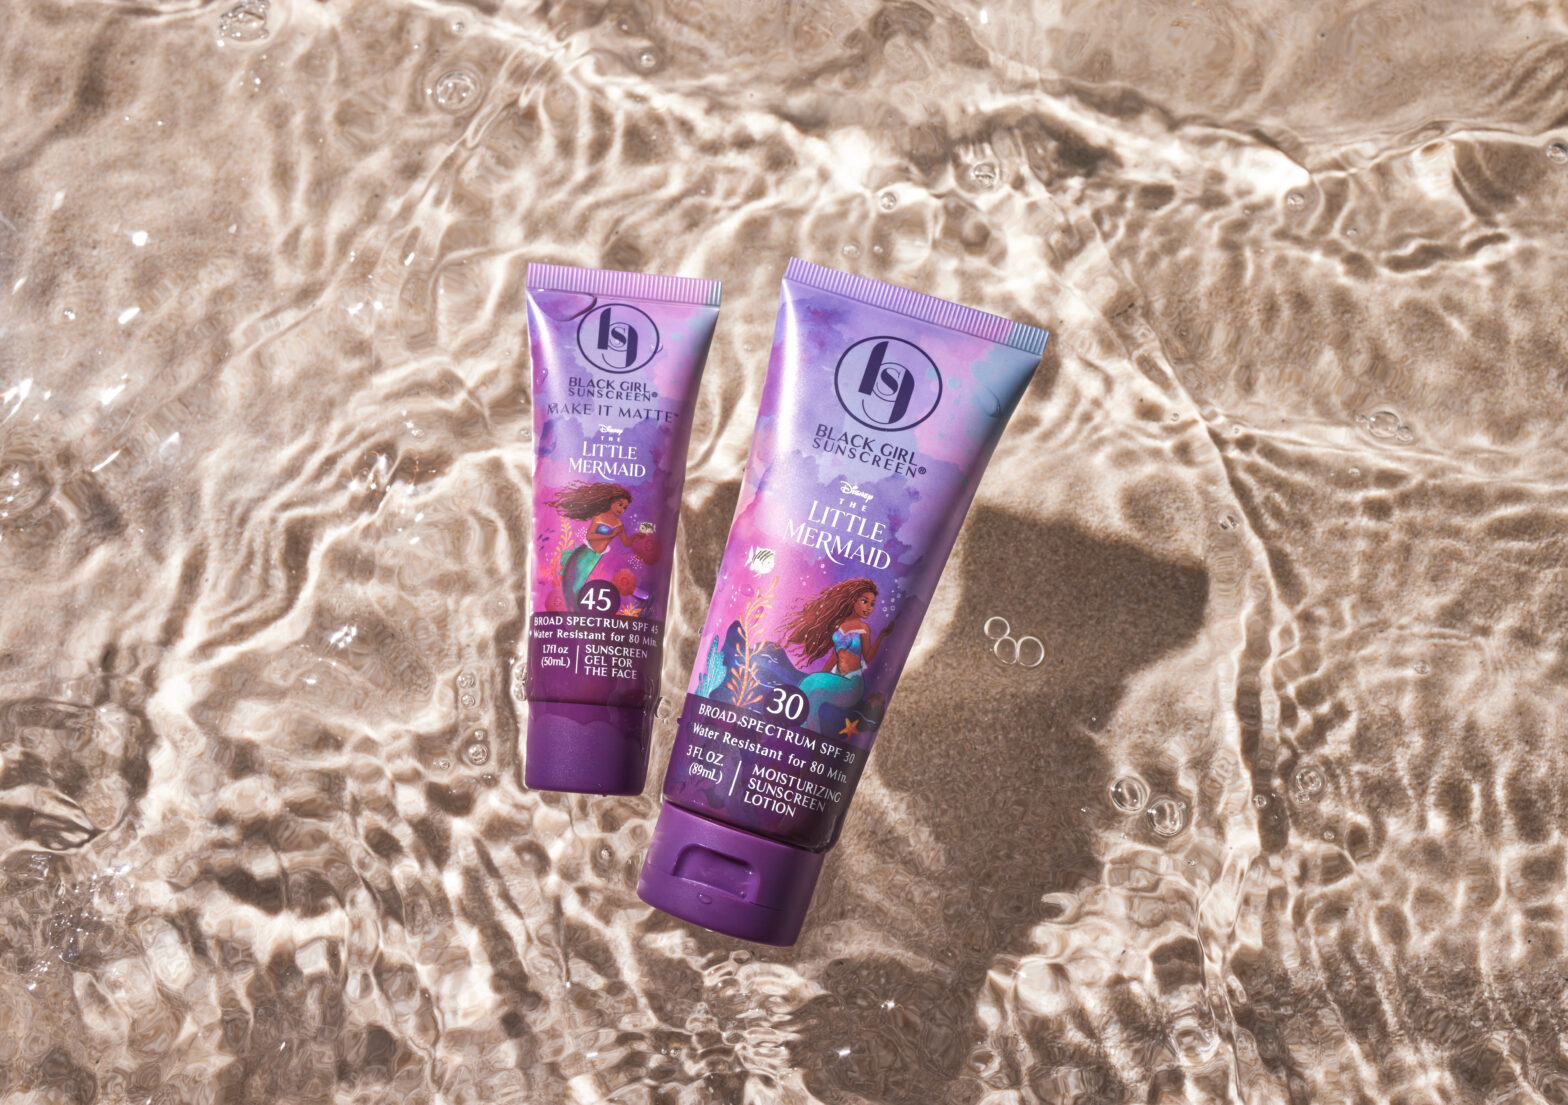 Black Girl Sunscreen and The Little Mermaid Bring Us the Beauty Collab We’ve Been Needing 